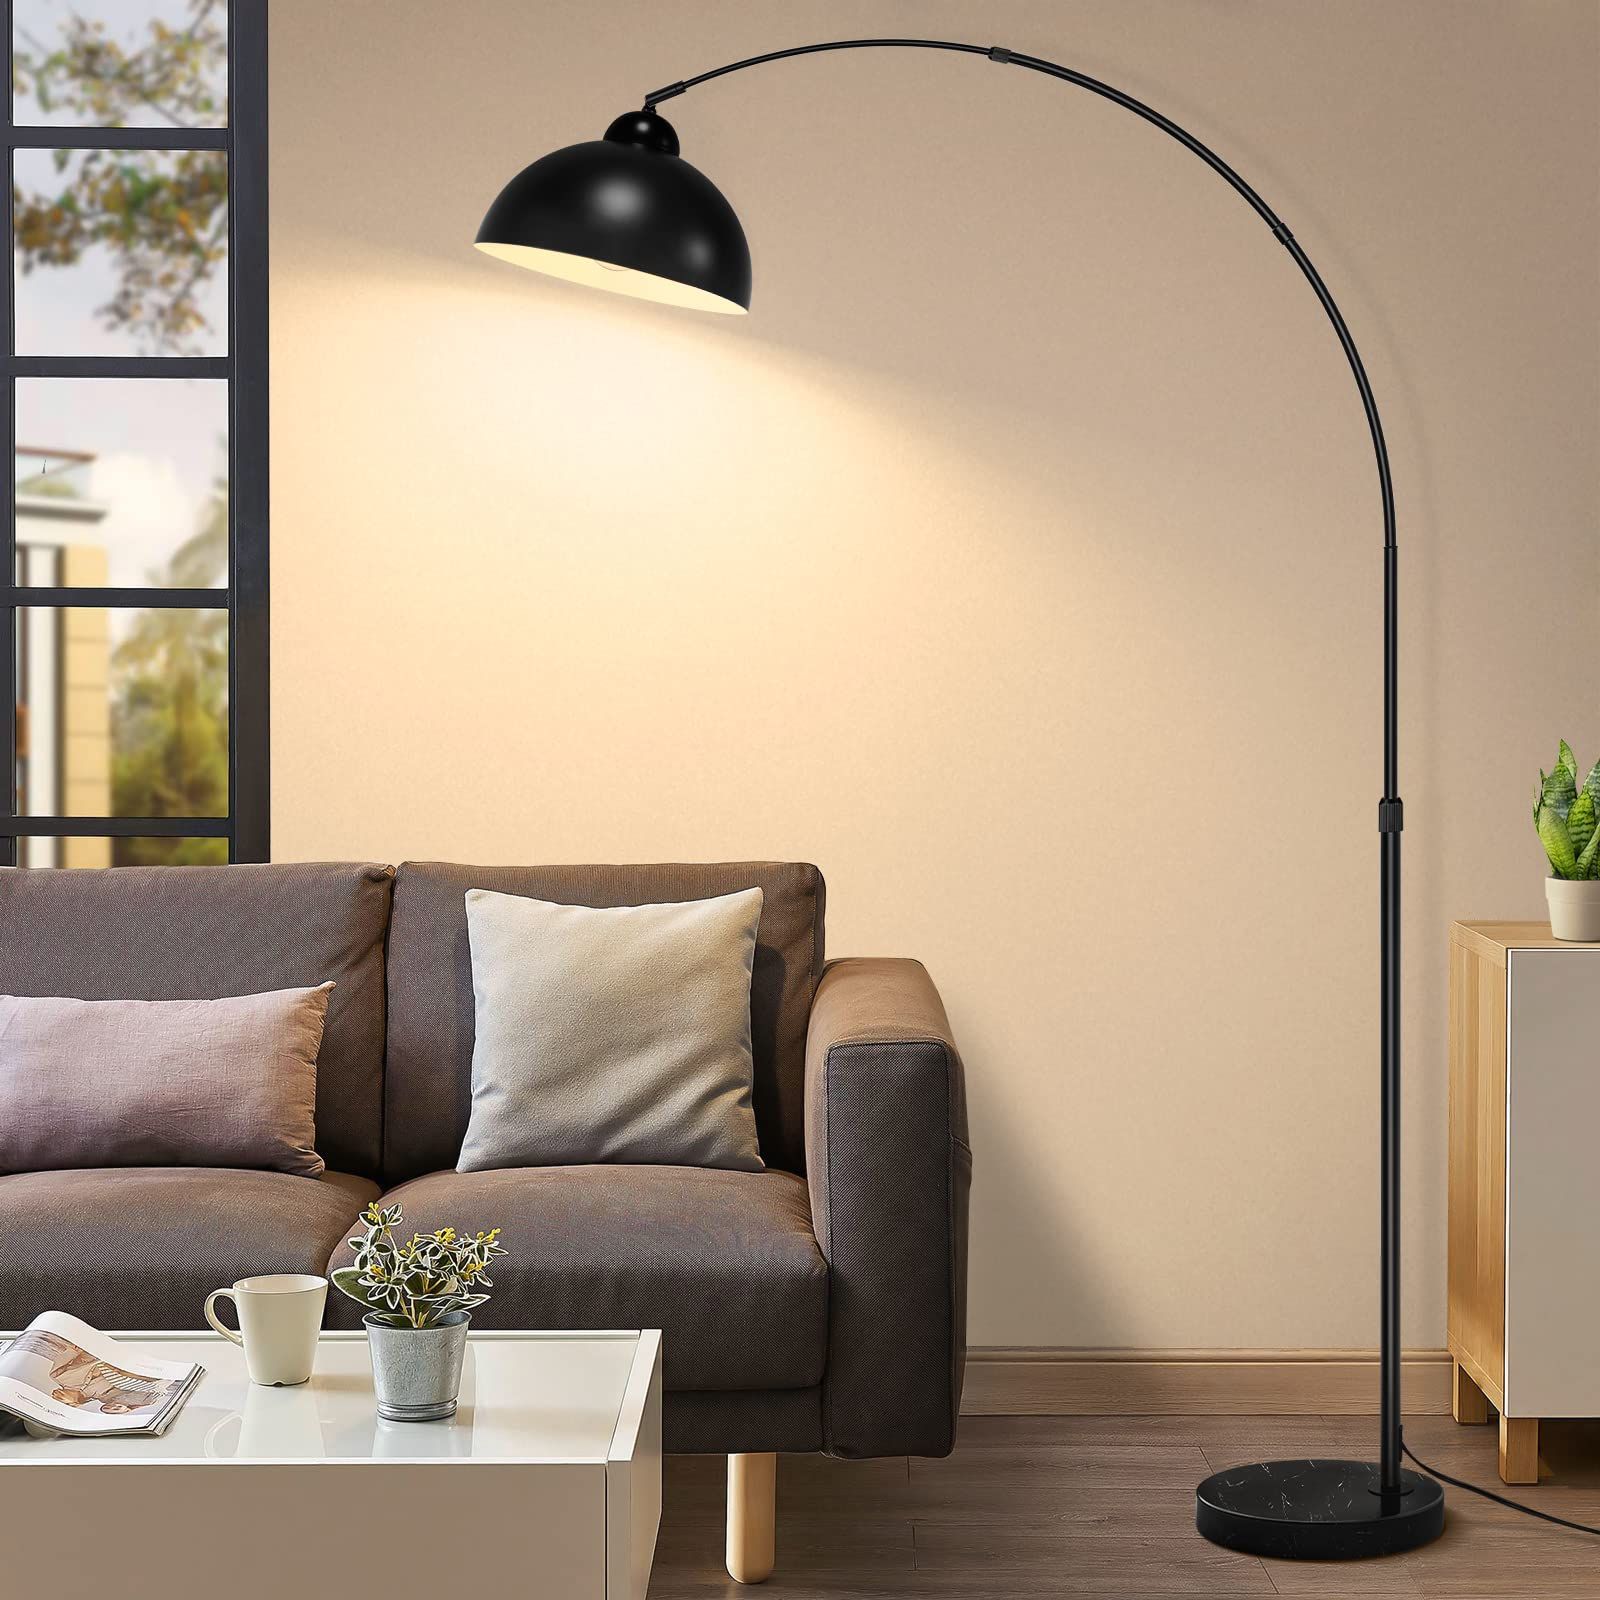 Arc Standing Lamps Pertaining To Recent Modern 73" Arc Floor Lamp With Metal Hanging Dome Shade, Industrial  Adjustable Over The Couch Stand Up Light, Marble Base Farmhouse Tall  Task/reading Standing Lamp For Living Room Bedroom Office Black – – (View 3 of 15)